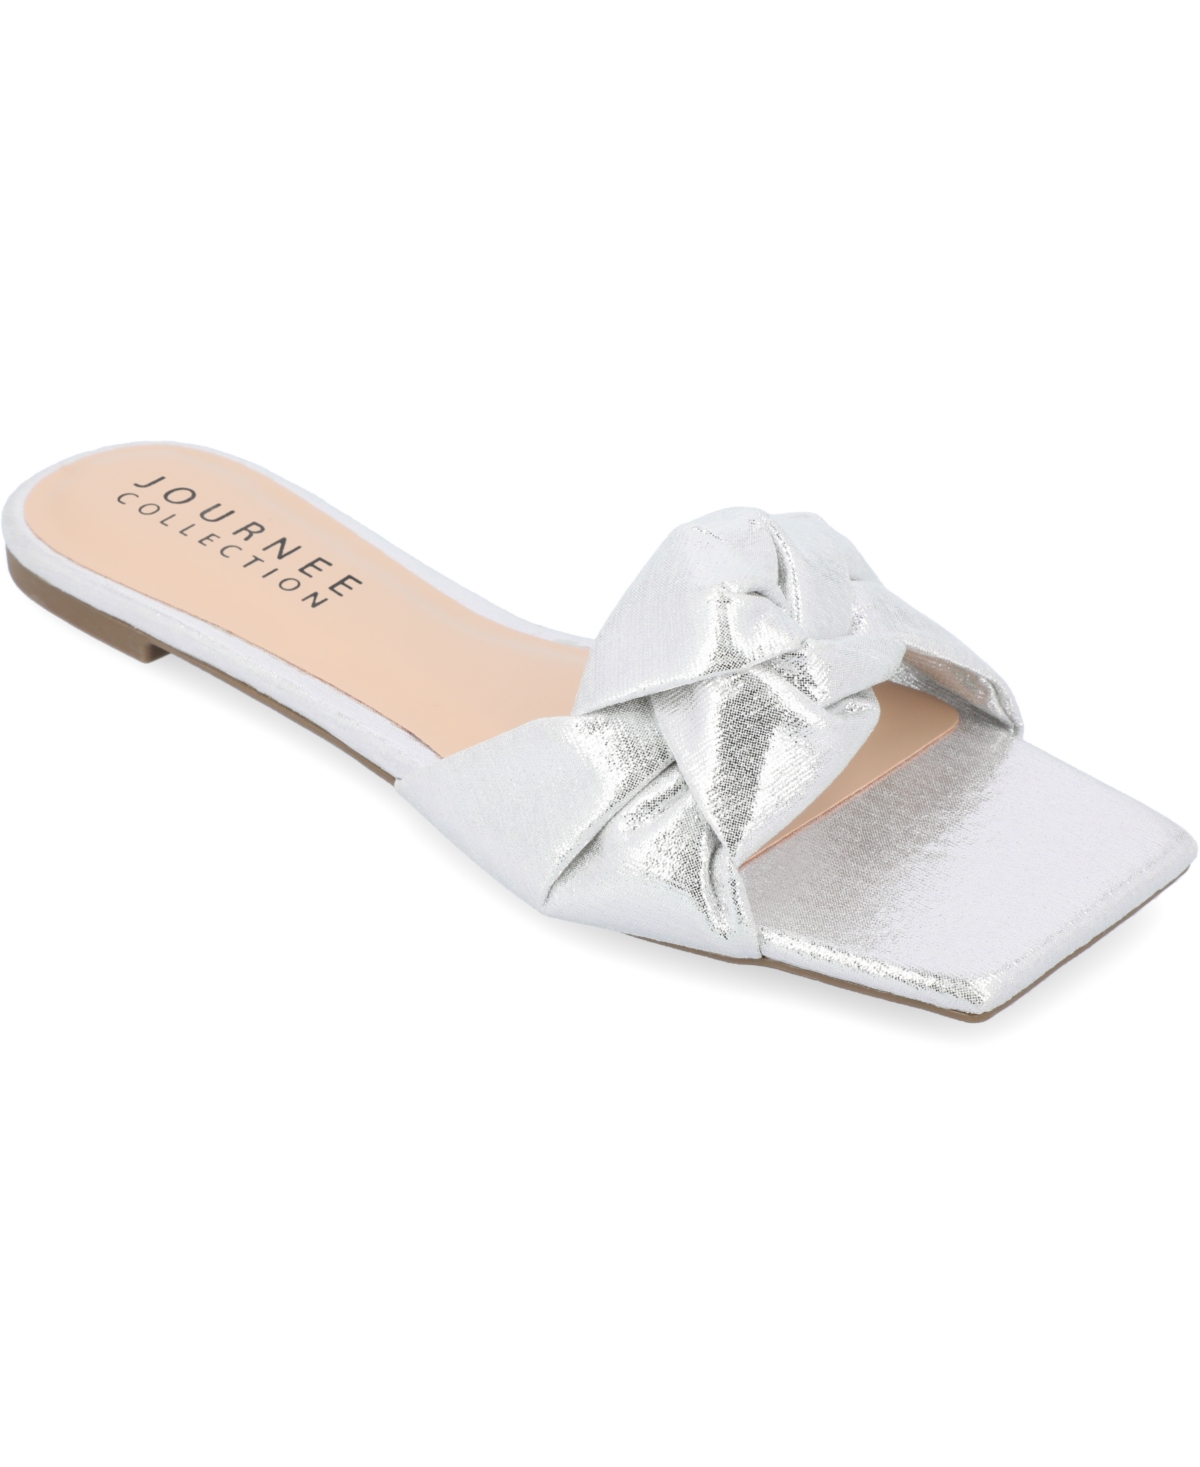 Women's Dianah Knotted Sandals - Silver